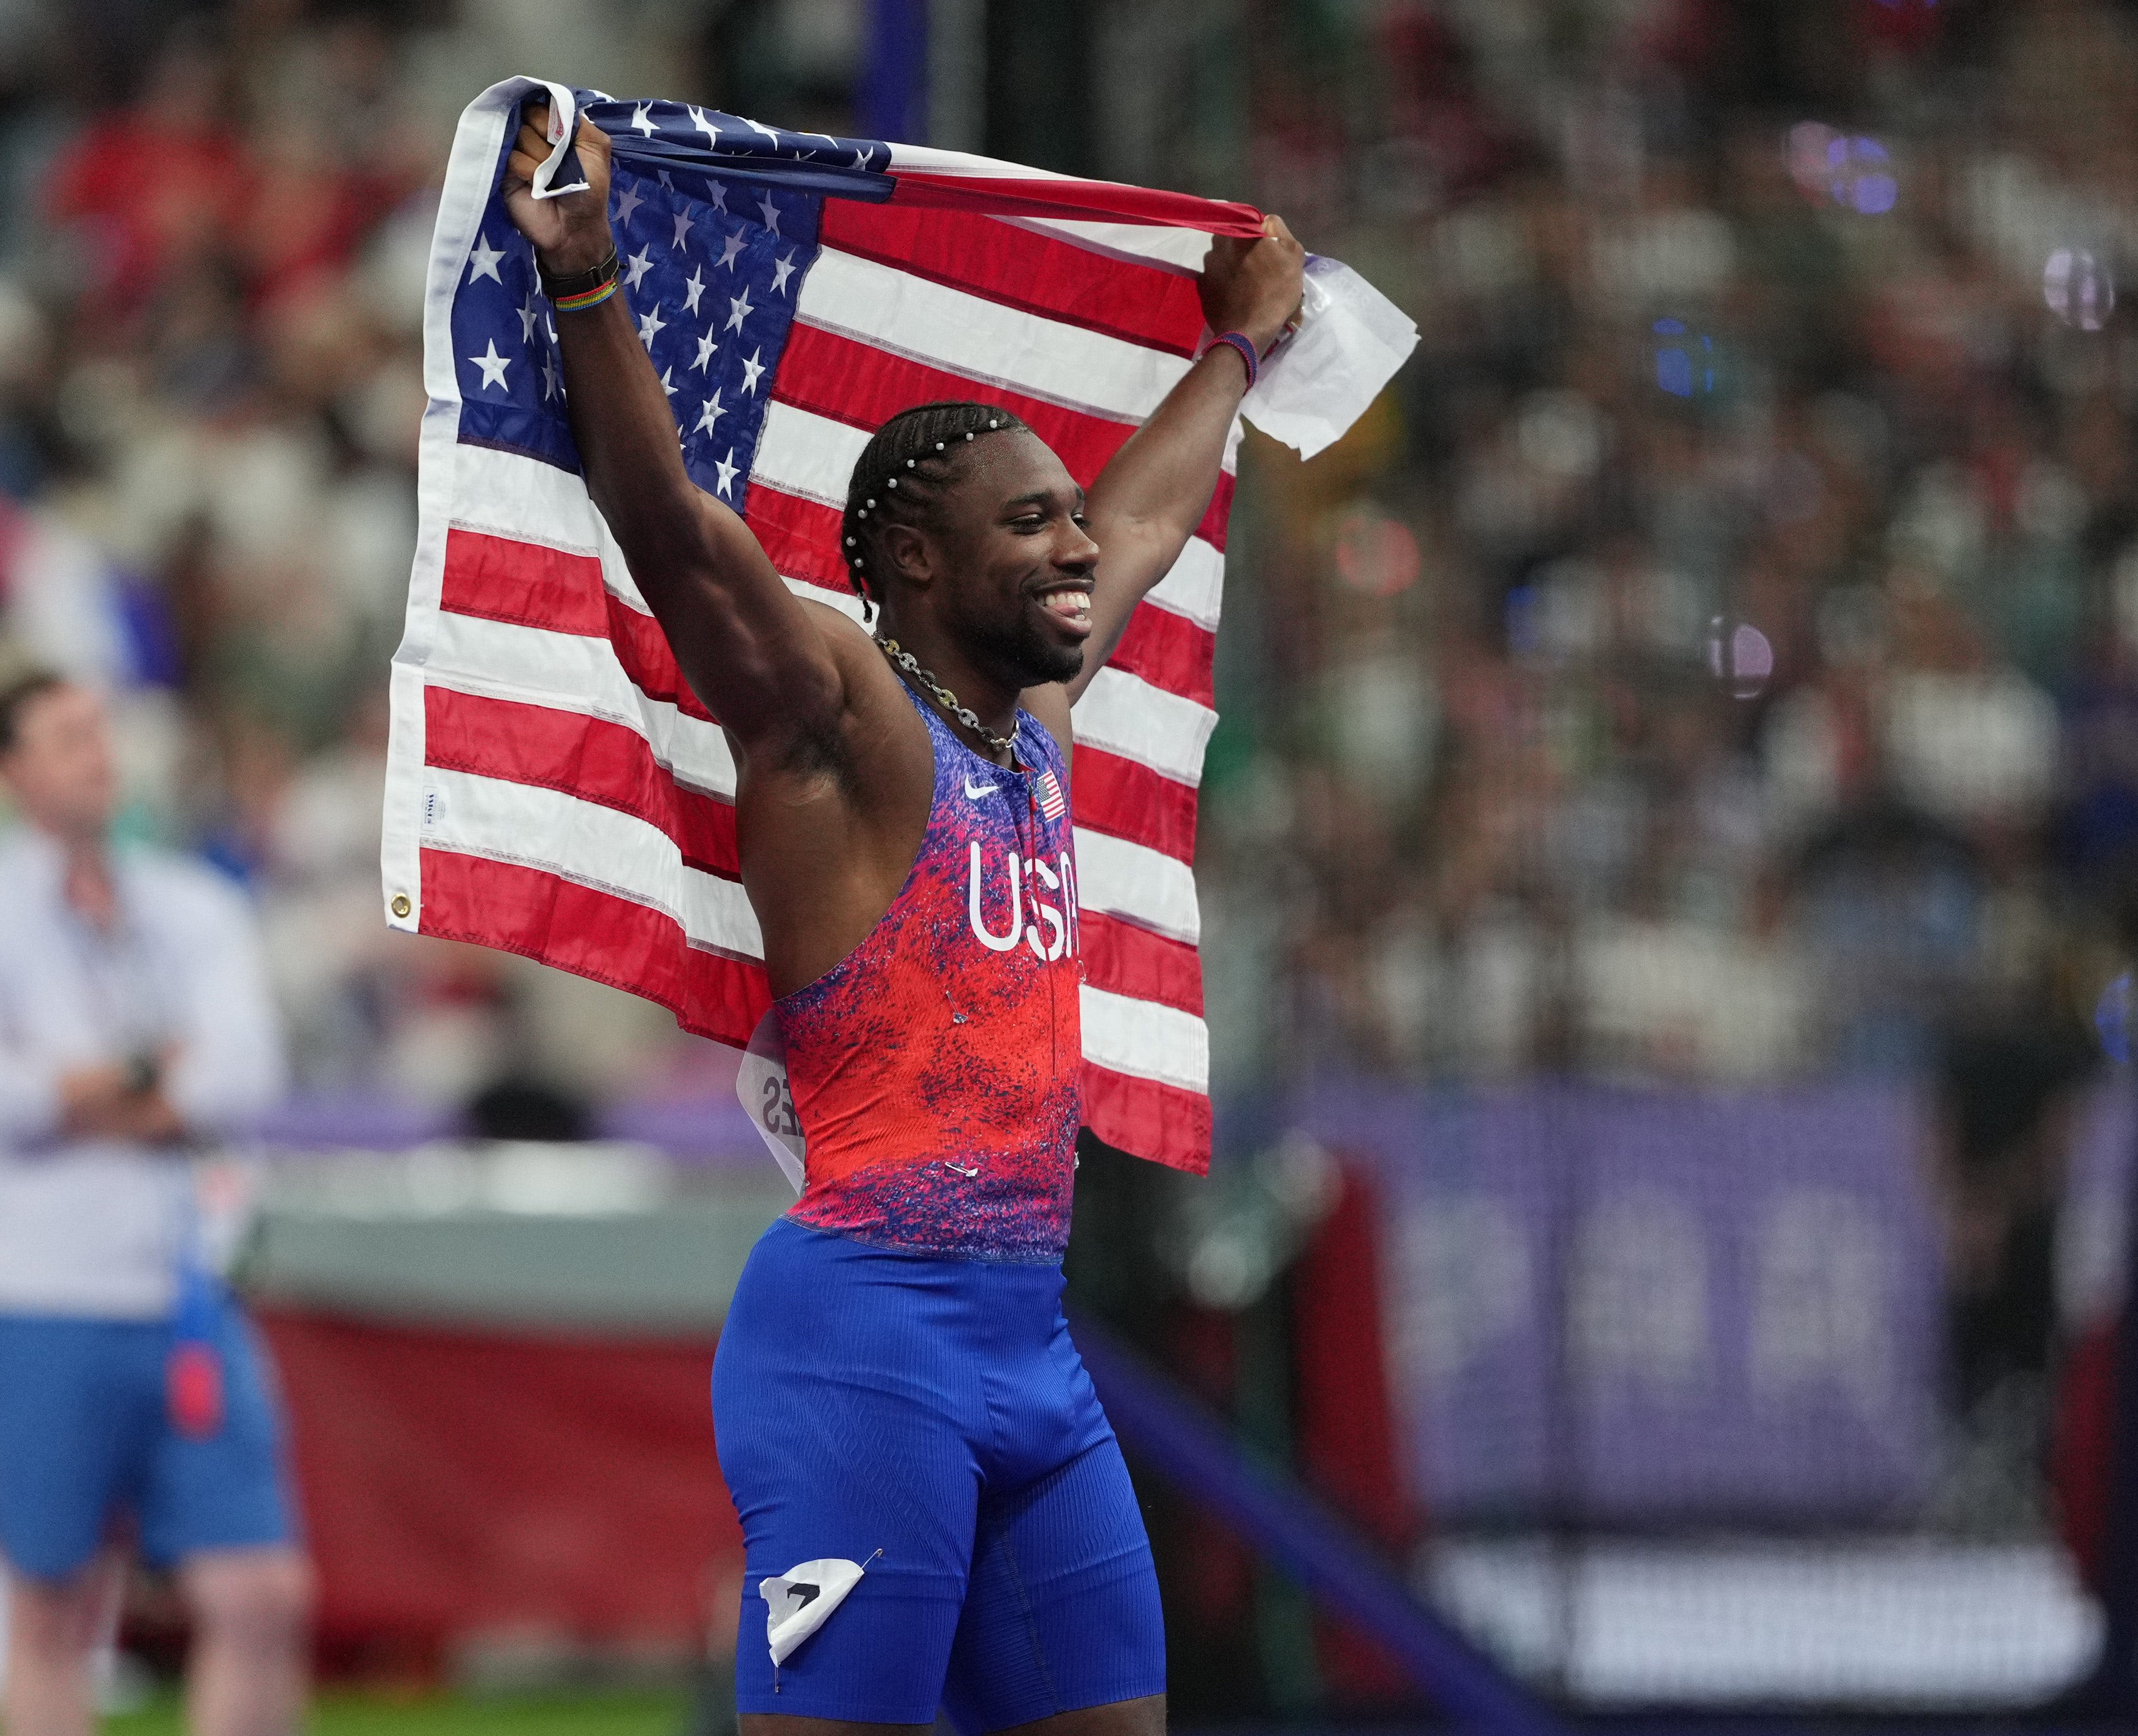 Noah Lyles wins gold in 100m final: Social reactions to track star's latest Olympic medal